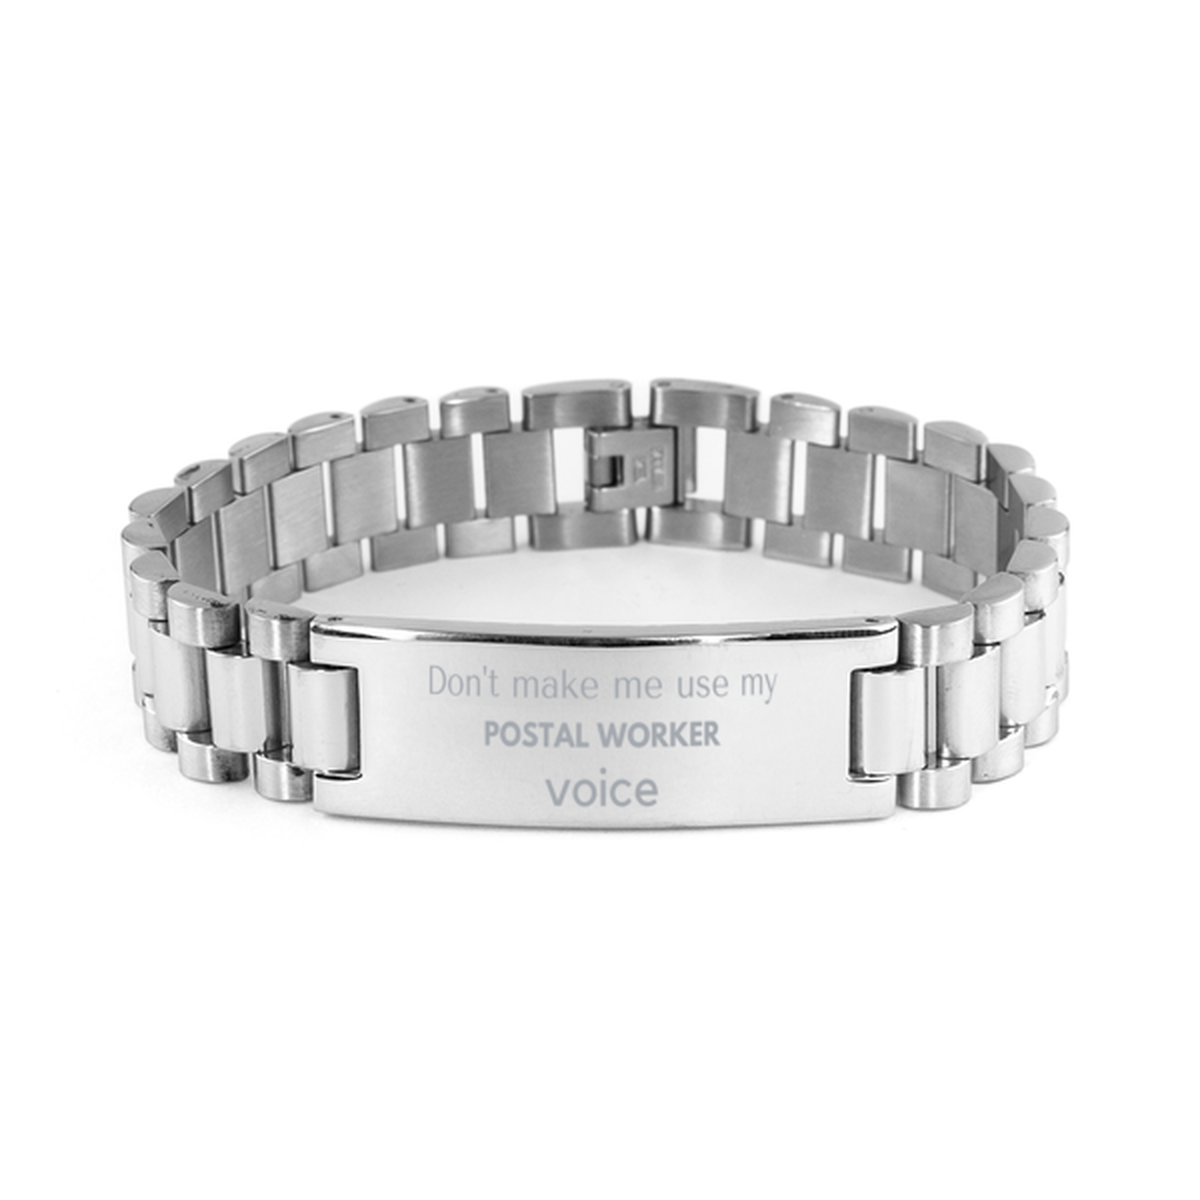 Don't make me use my Postal Worker voice, Sarcasm Postal Worker Gifts, Christmas Postal Worker Ladder Stainless Steel Bracelet Birthday Unique Gifts For Postal Worker Coworkers, Men, Women, Colleague, Friends